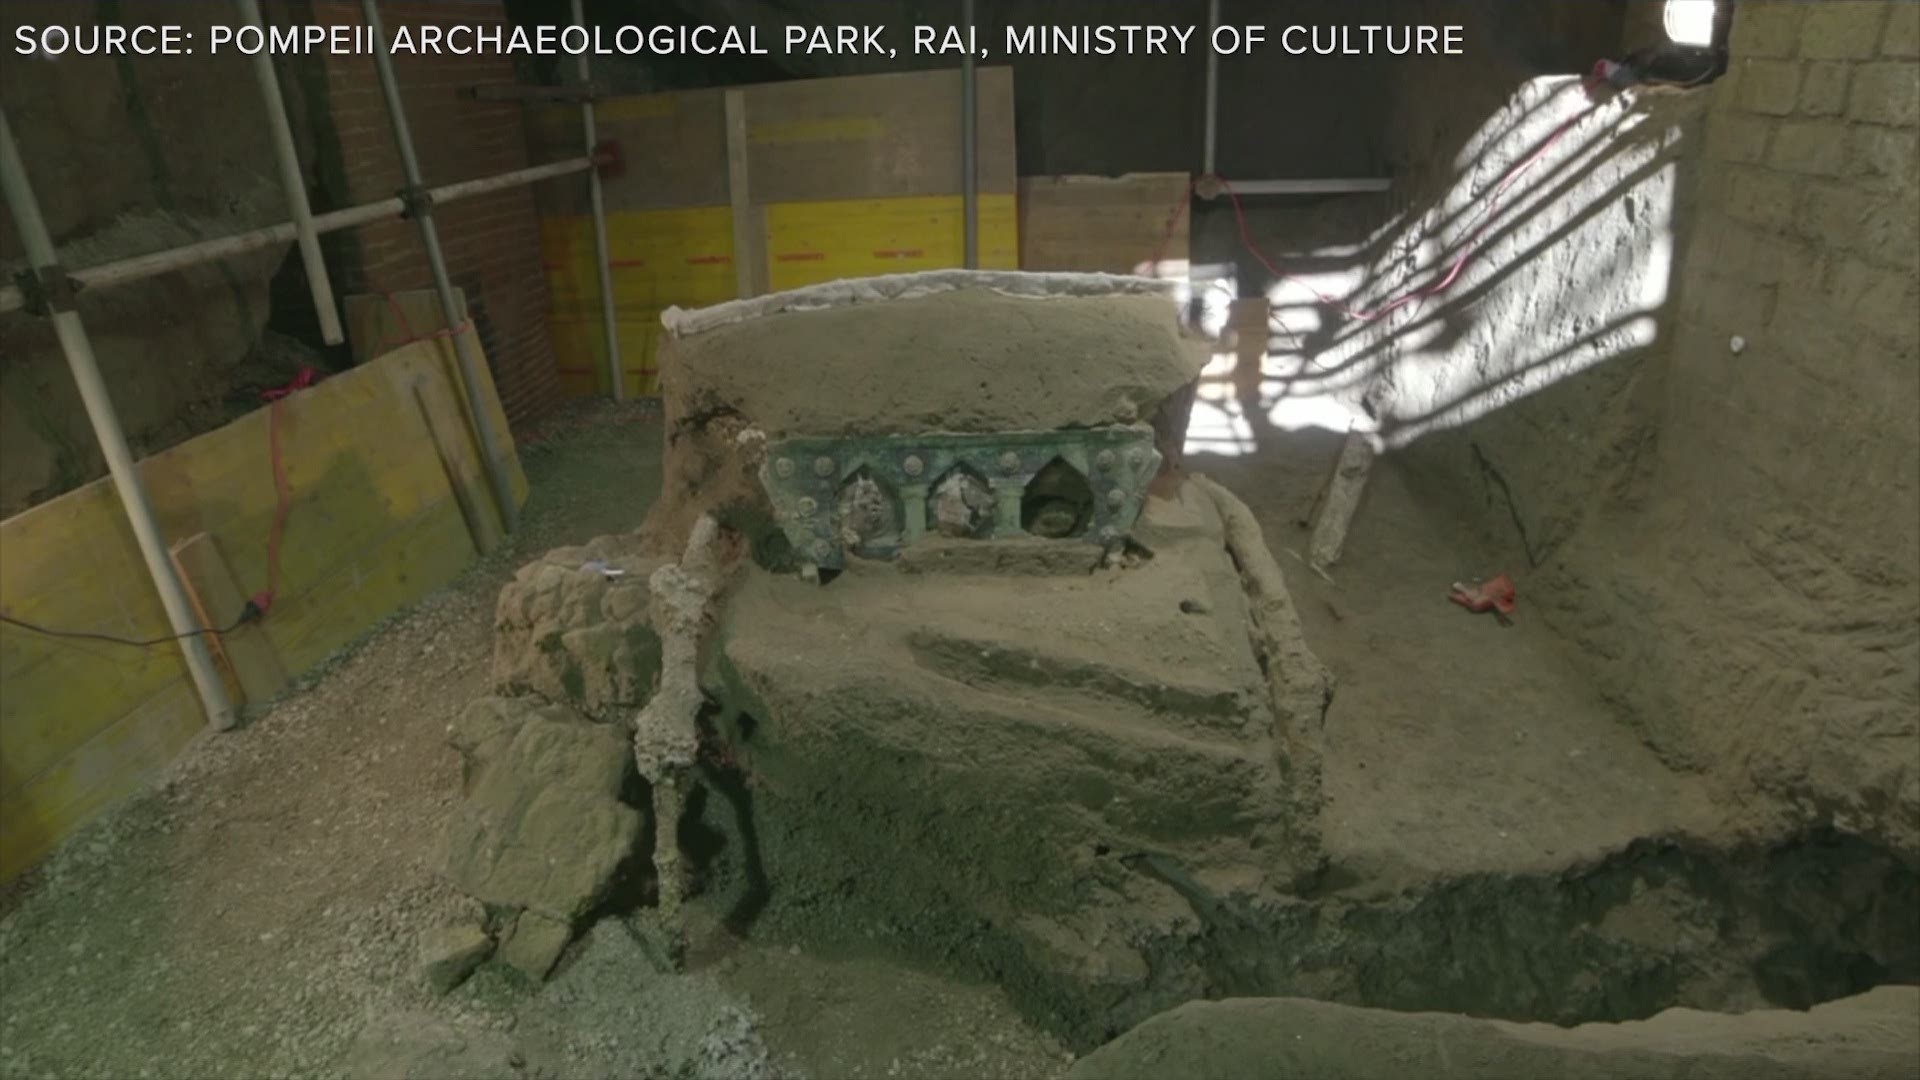 A large, four-wheeled ceremonial chariot, finely decorated and almost intact, has been discovered during excavations in Pompeii.